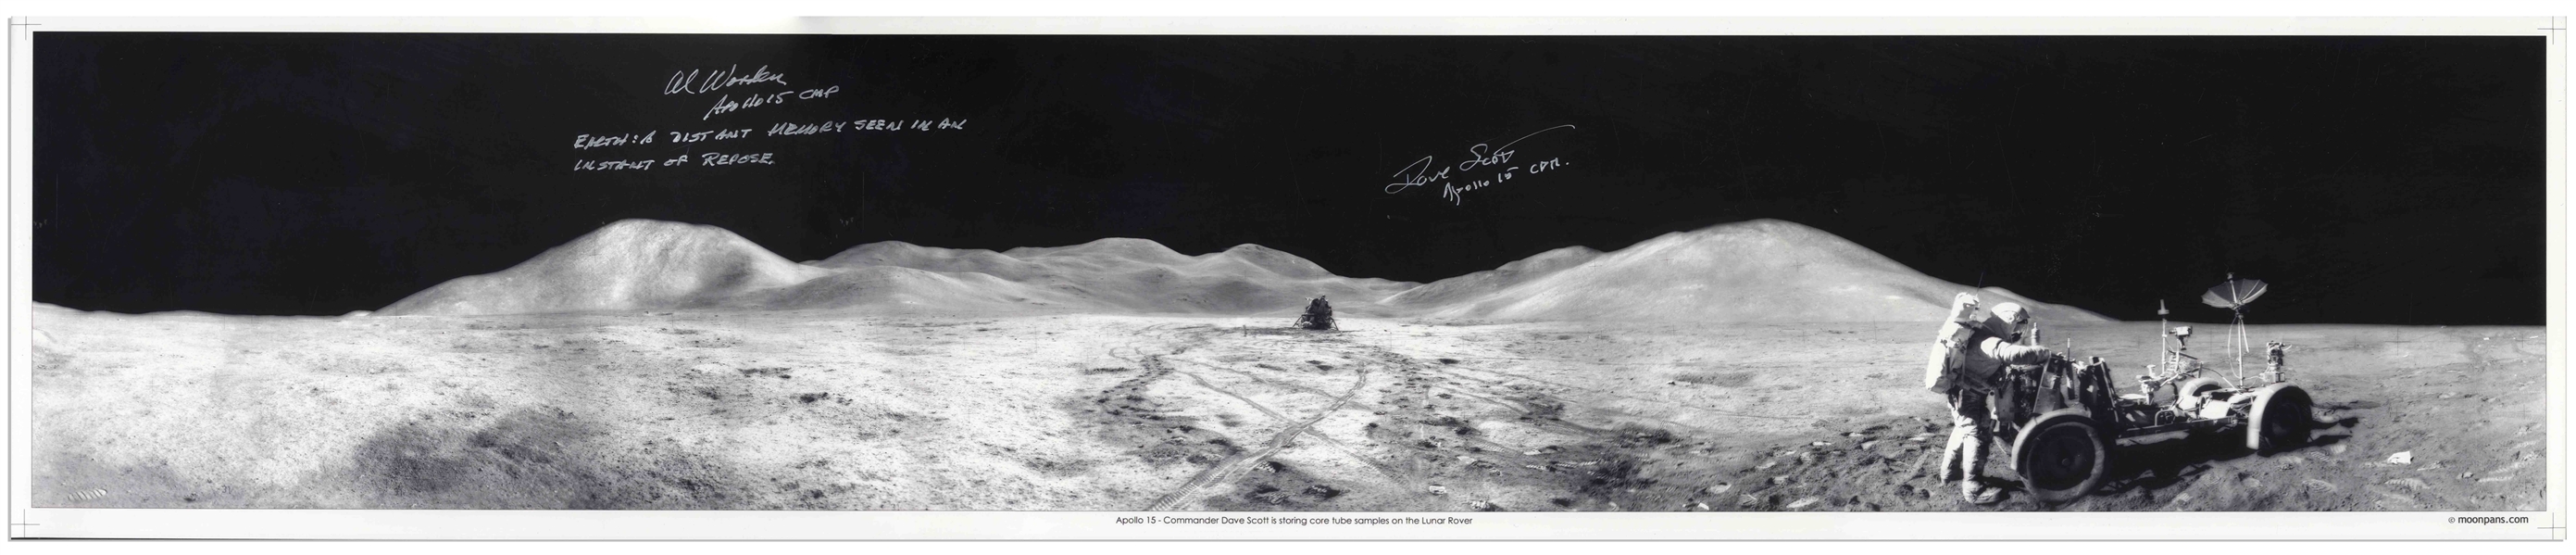 Al Worden & Dave Scott Signed Panoramic 40.5'' x 8.5'' Photo of the Moon's Surface -- Worden Additionally Writes His Famous Quote About Seeing Earth From the Moon